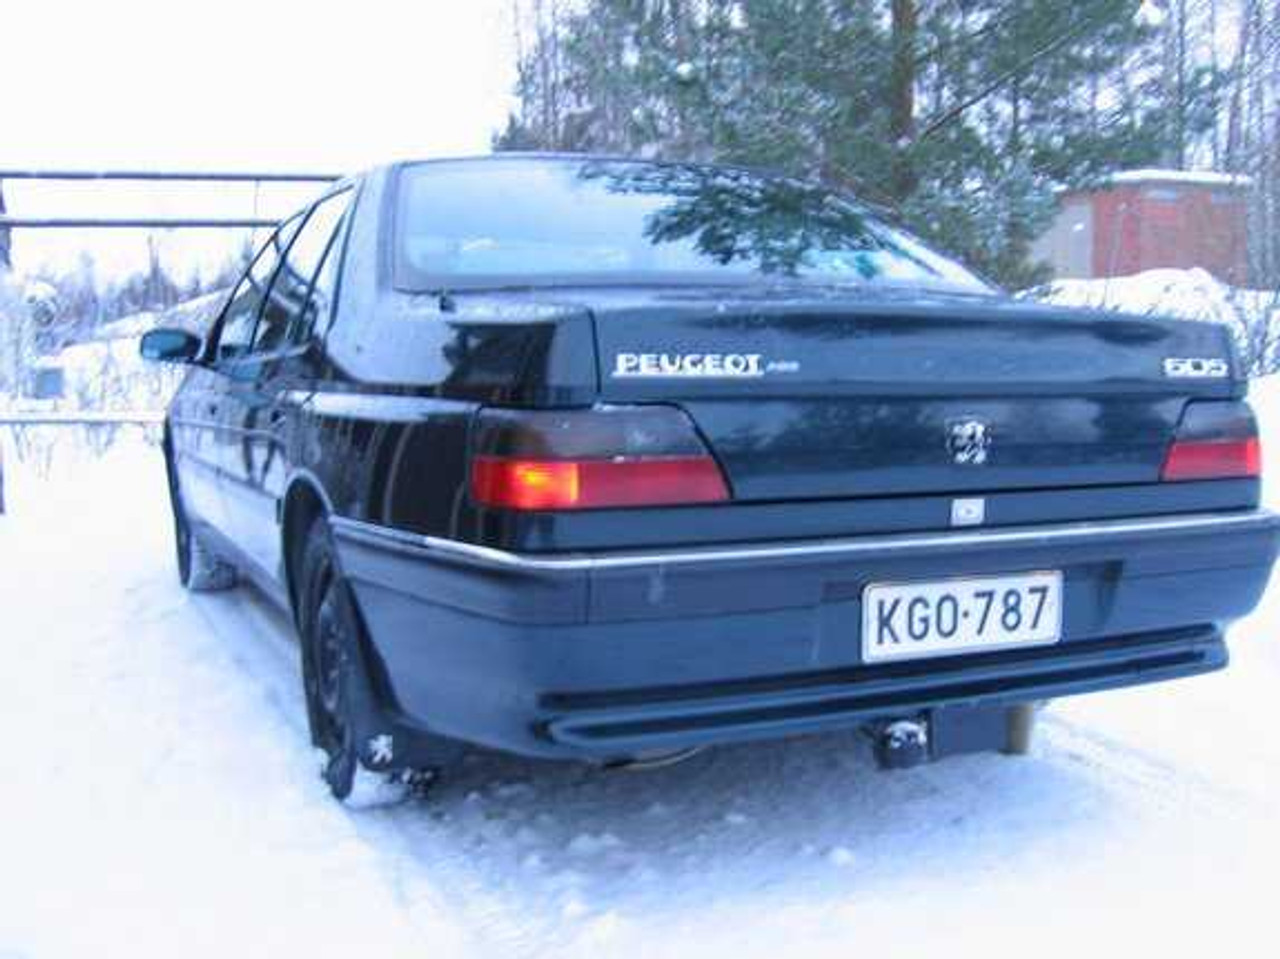 Peugeot 605 607 Tinted Smoked Taillamps Taillights Tail Lamps Lights Protection Overlays Film